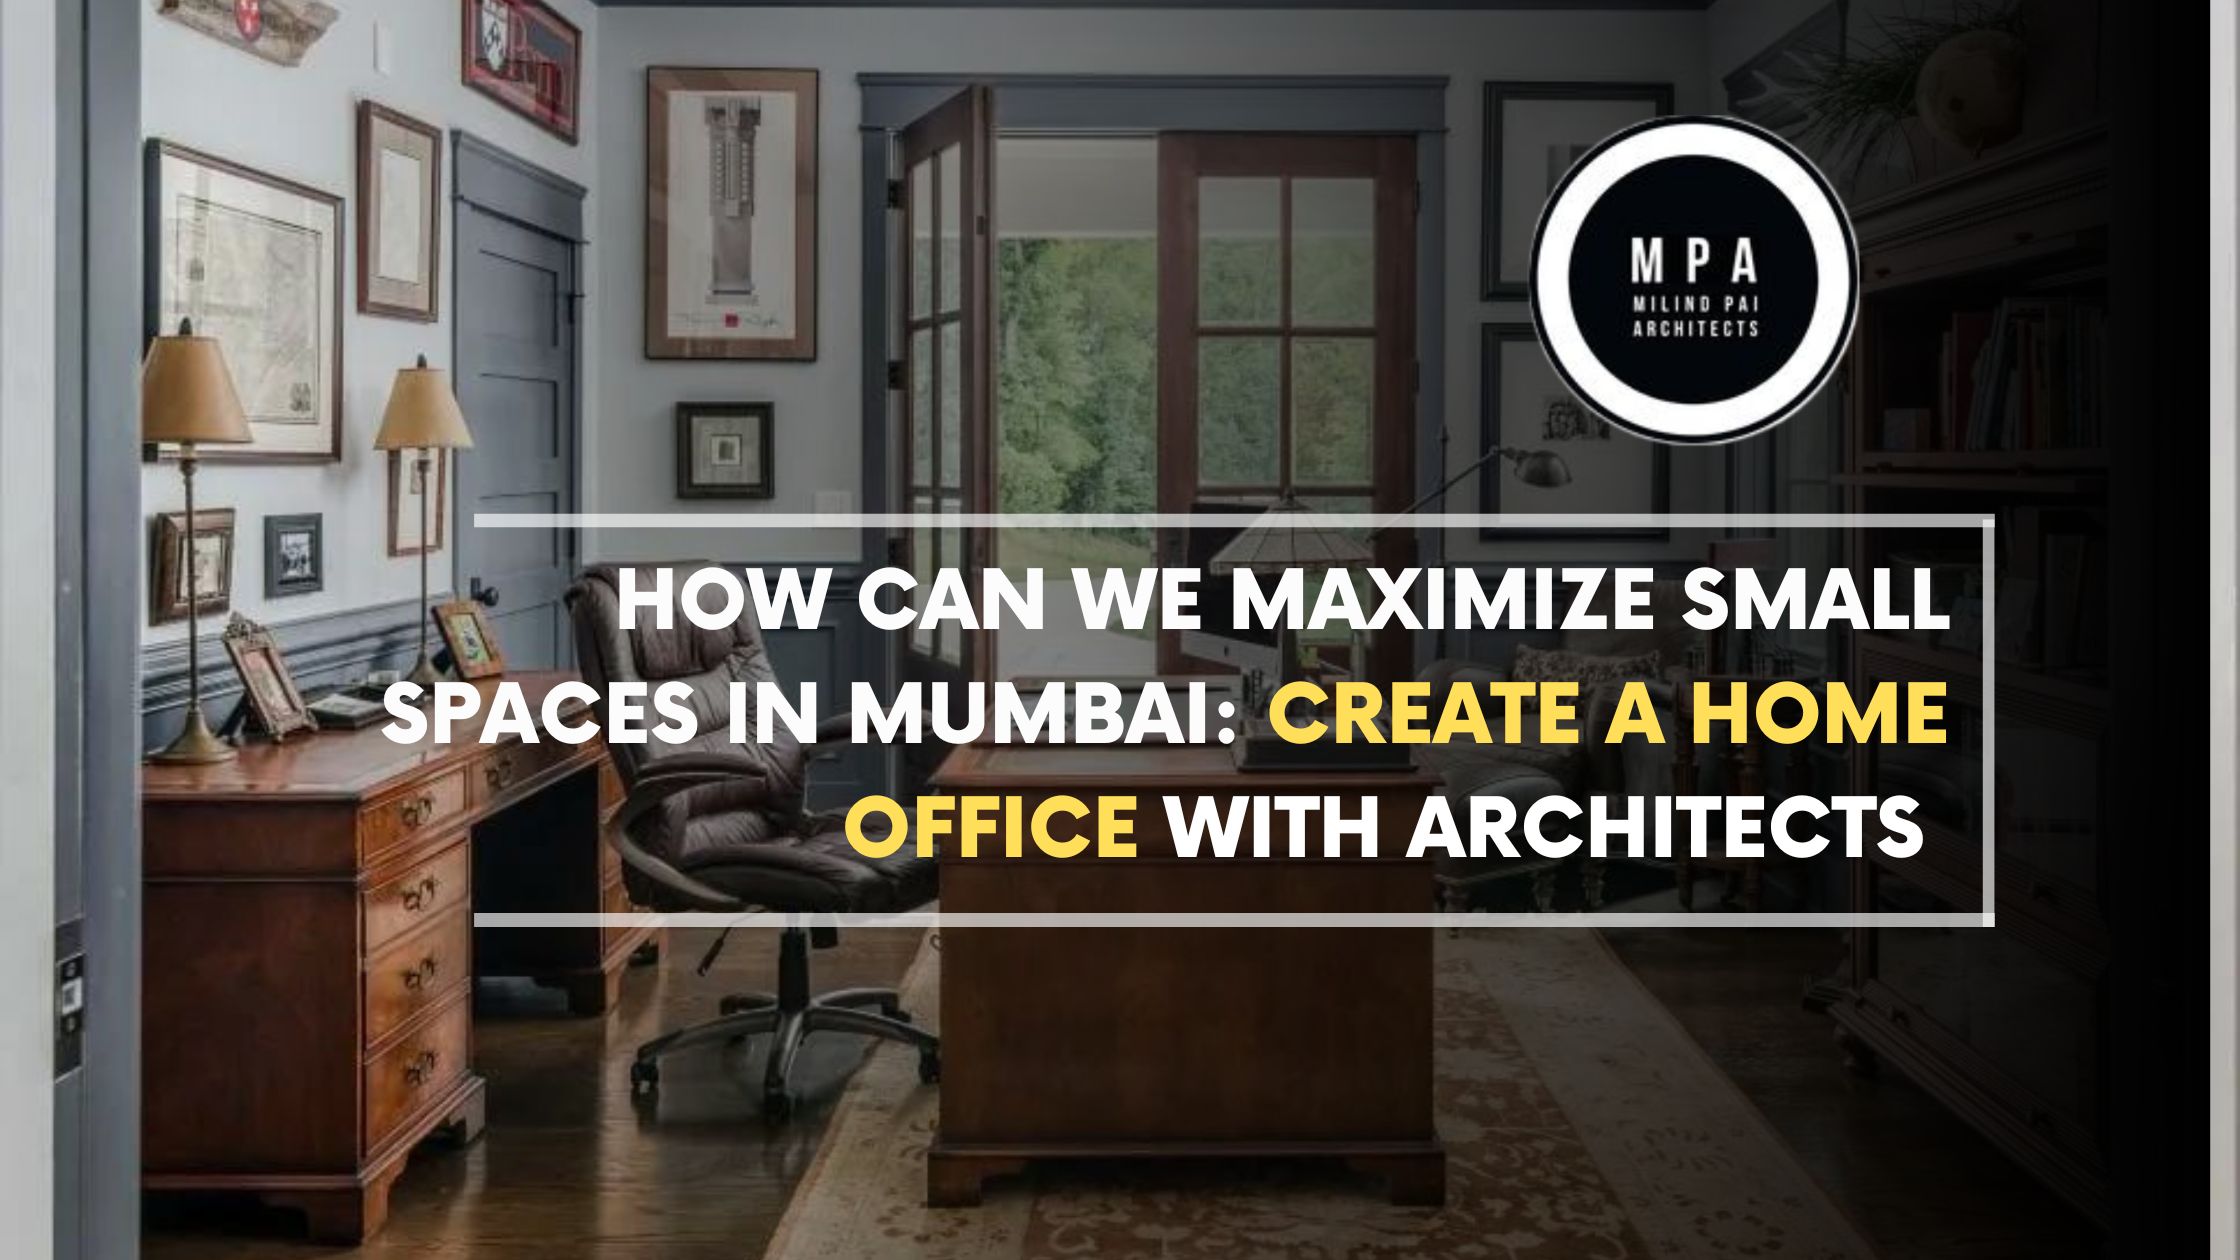 How Can We Maximize Small Spaces in Mumbai: Create a Home Office with Architects